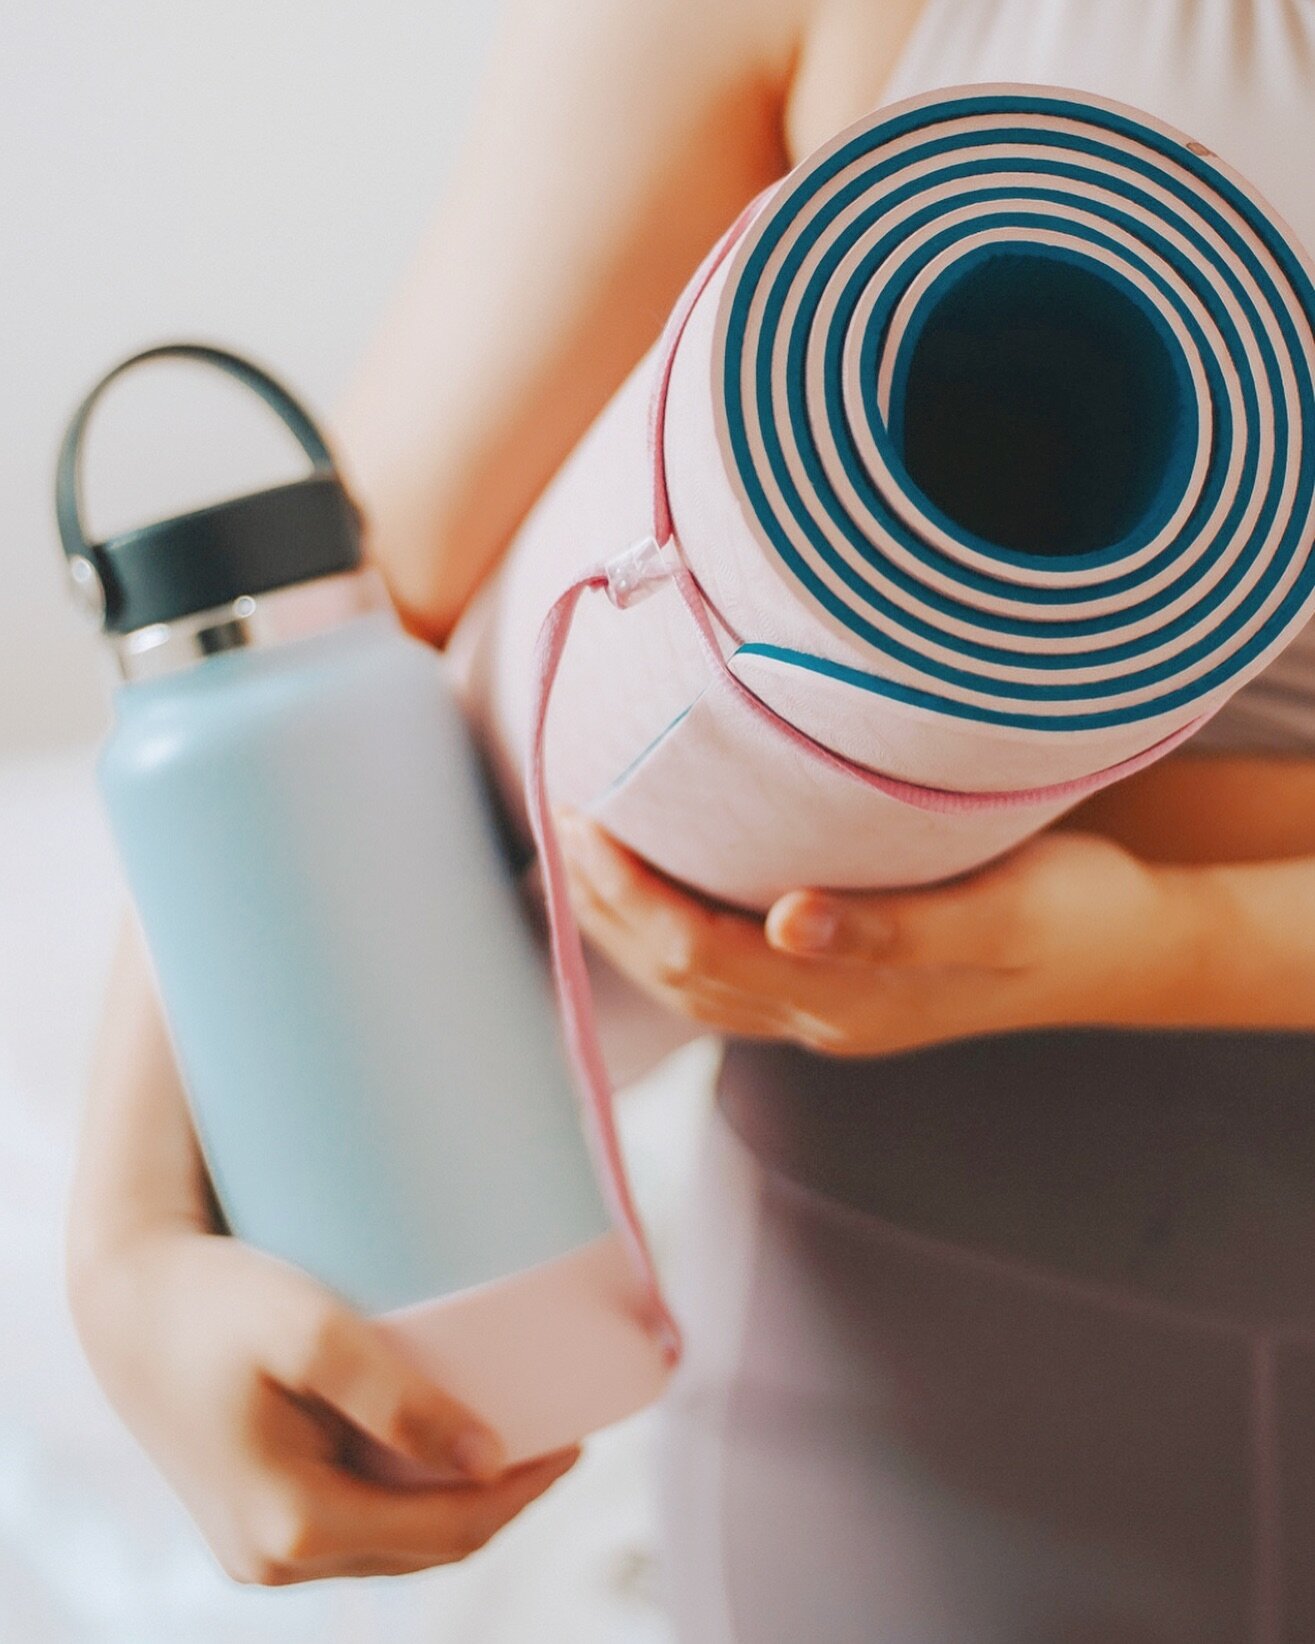 Upgrade your yoga aesthetic with cute new yoga accessories✨ Our retail shop has all new products including yoga accessories; mats, straps, blankets &amp; more! 😌